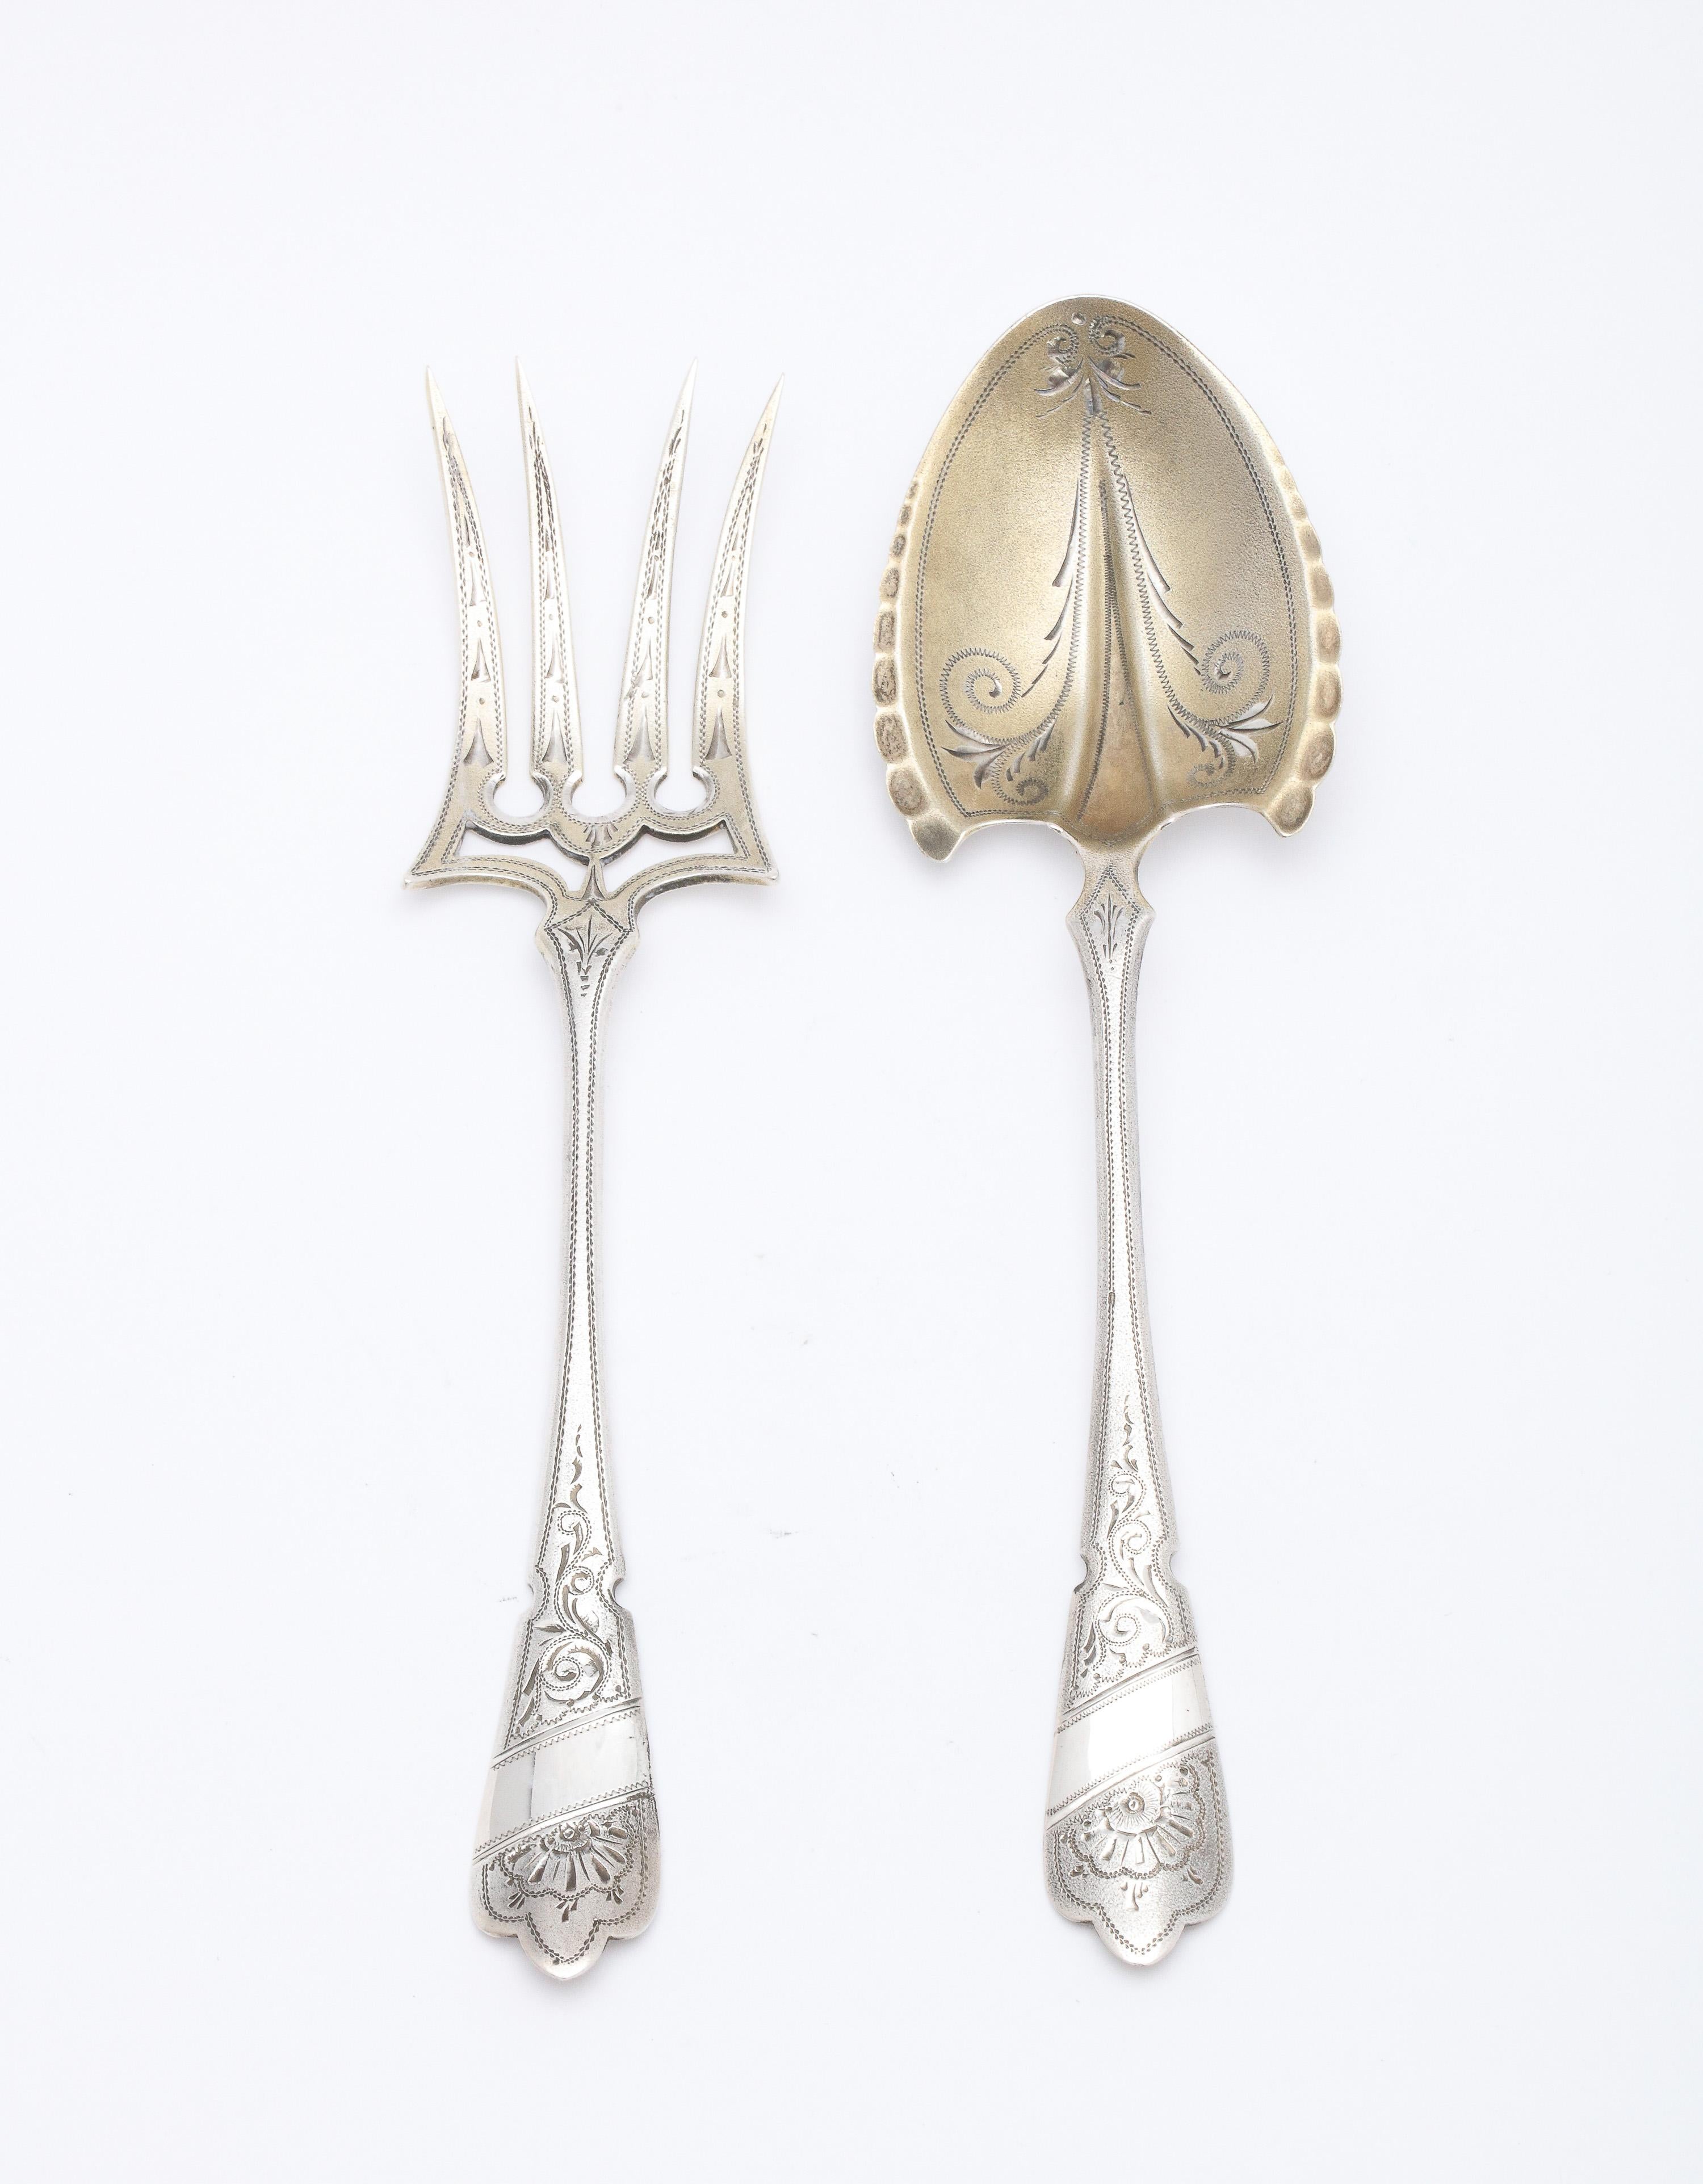 Edwardian Period, Continental Silver (.800), parcel gilt cake/dessert serving set, Germany, Ca. 1910. Bright cut design of both pieces makes them look as if they are inset with jewels when light shines on them. The serving fork measures 7 inches